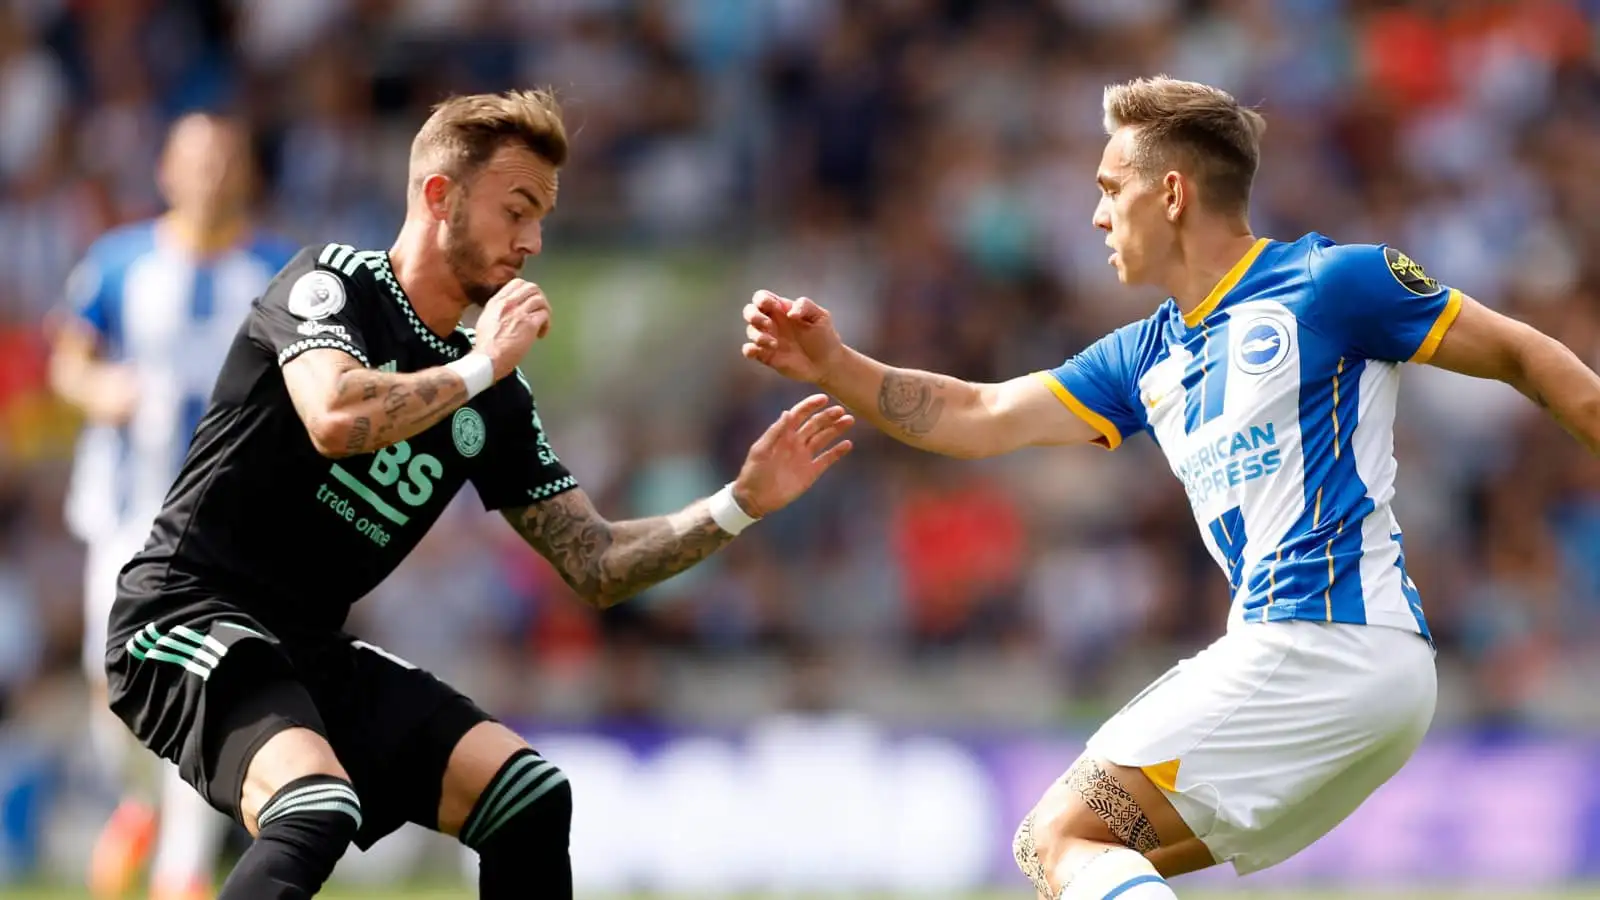 Leicester playmaker James Maddison and Brighton attacker Leandro Trossard